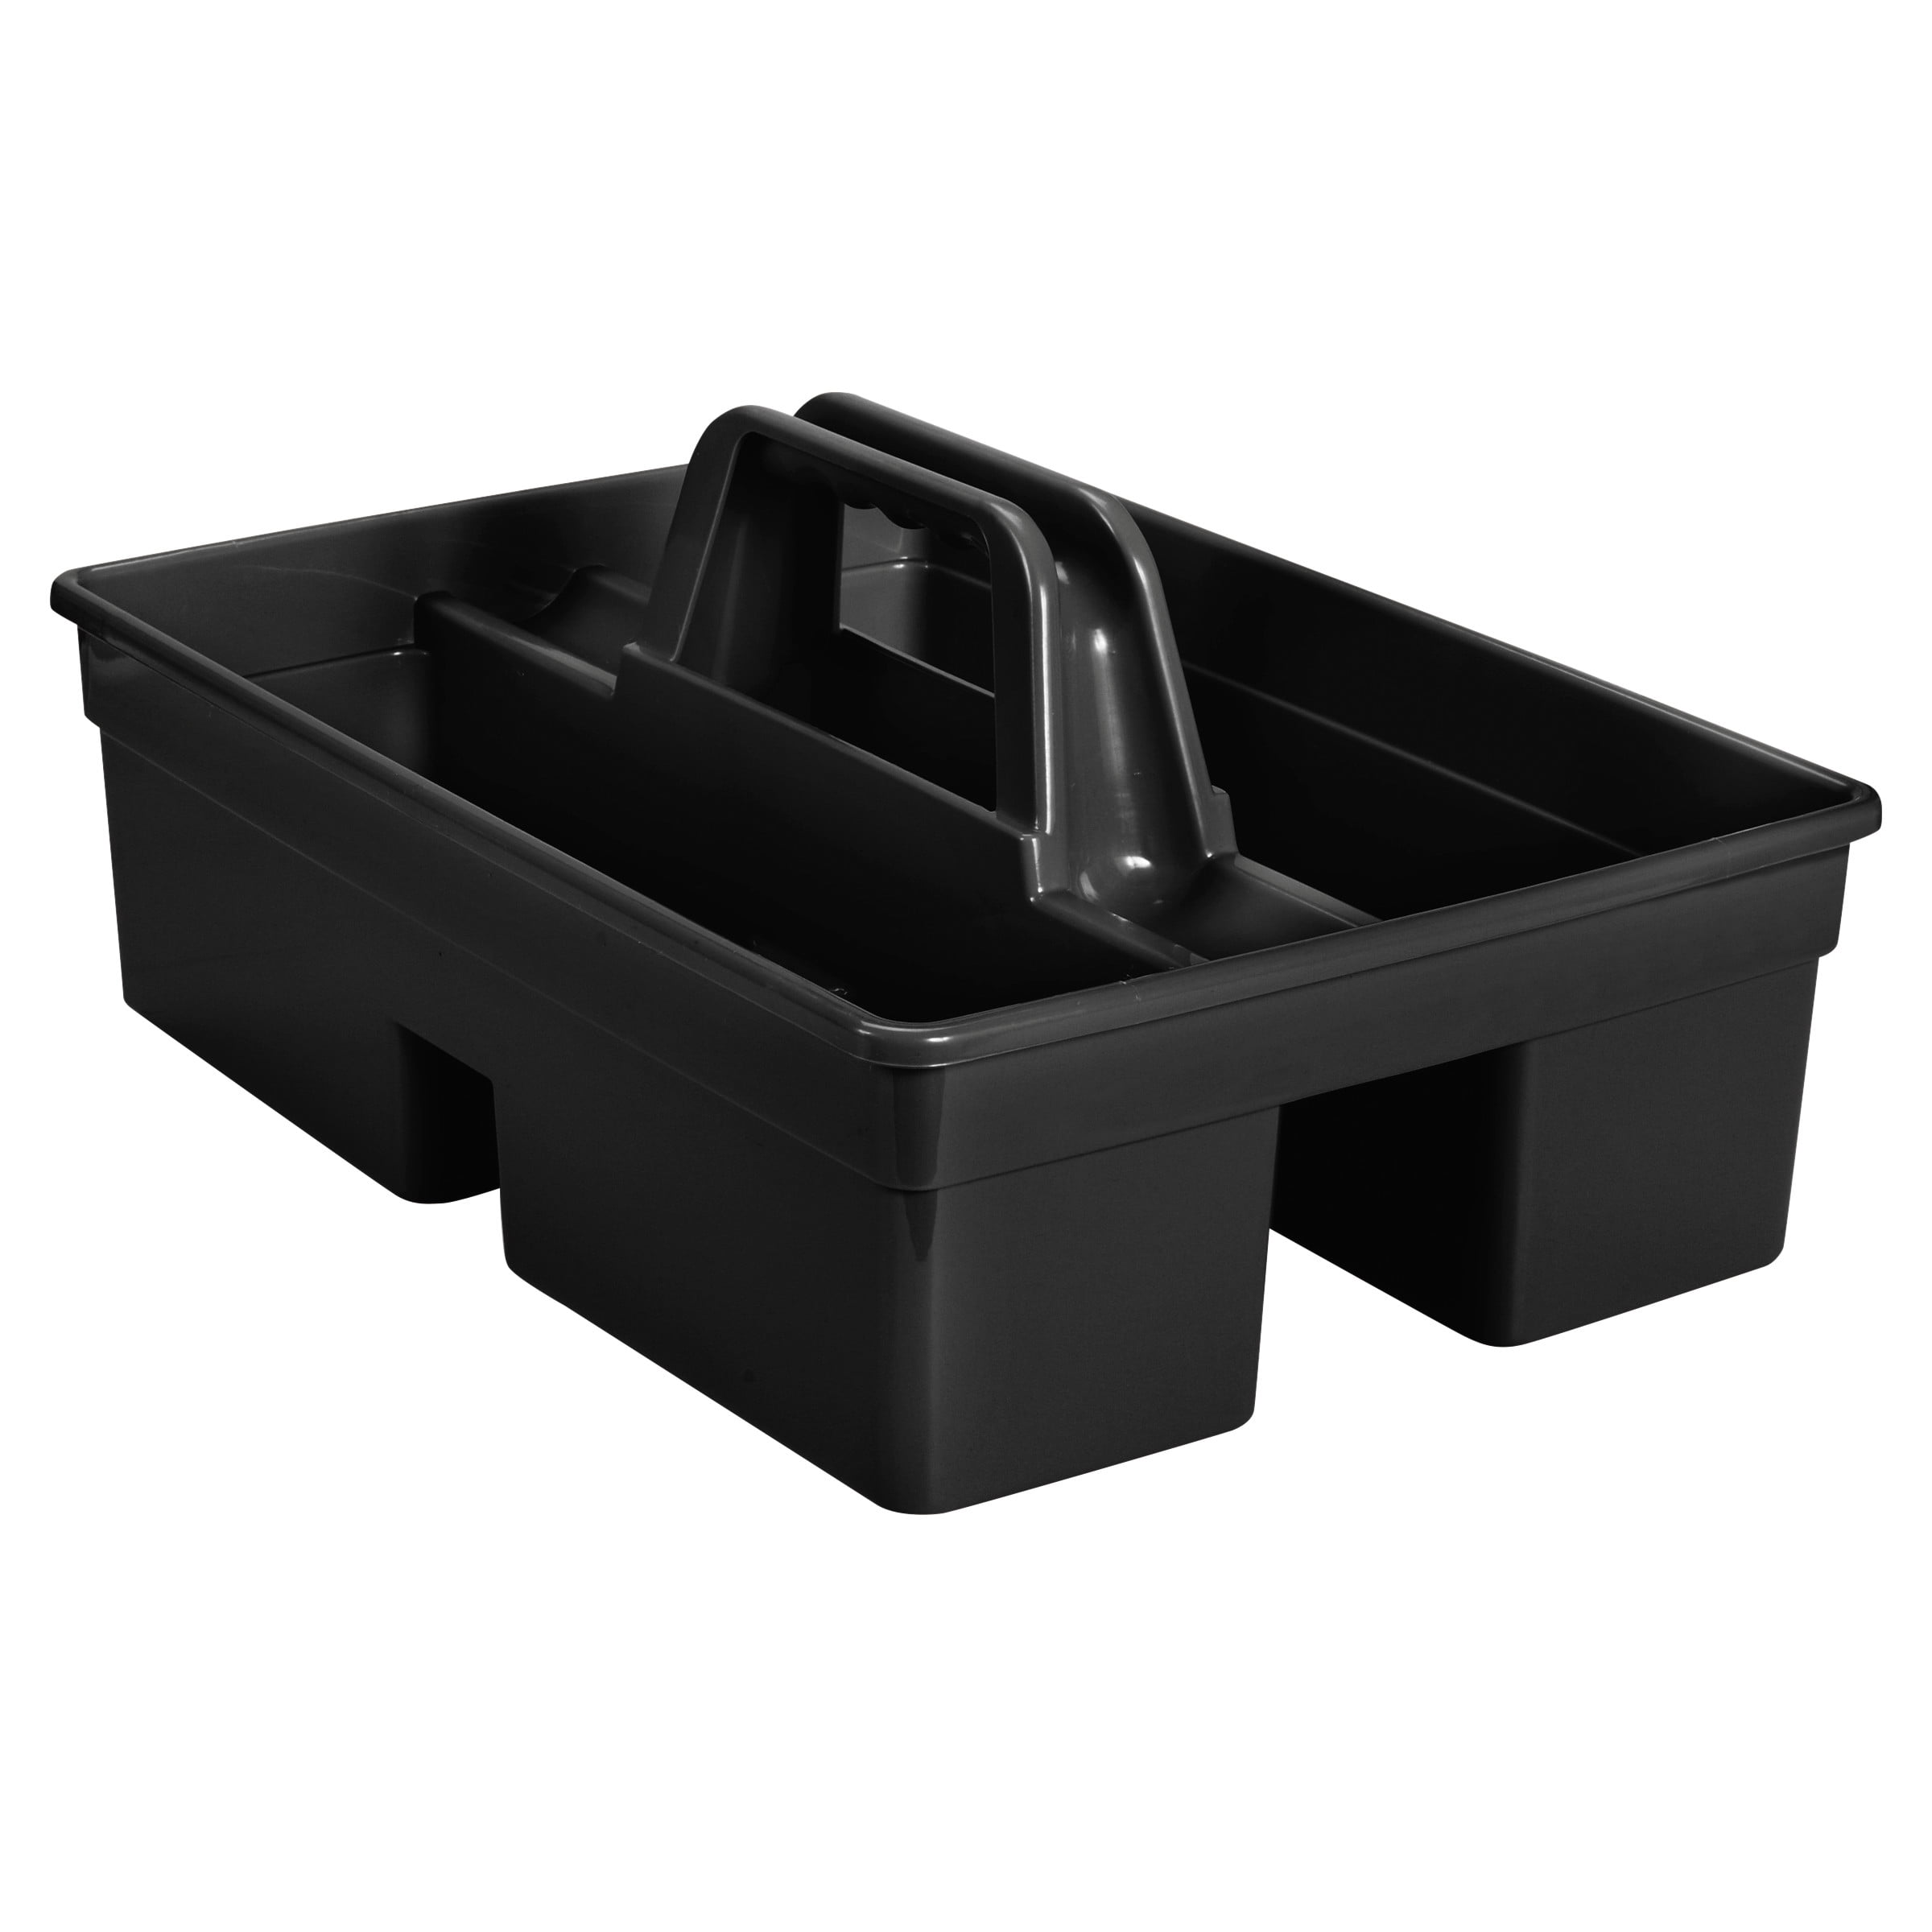 Totes Deluxe Arm 3 Compartment 73769 Rest Caddy for sale online 